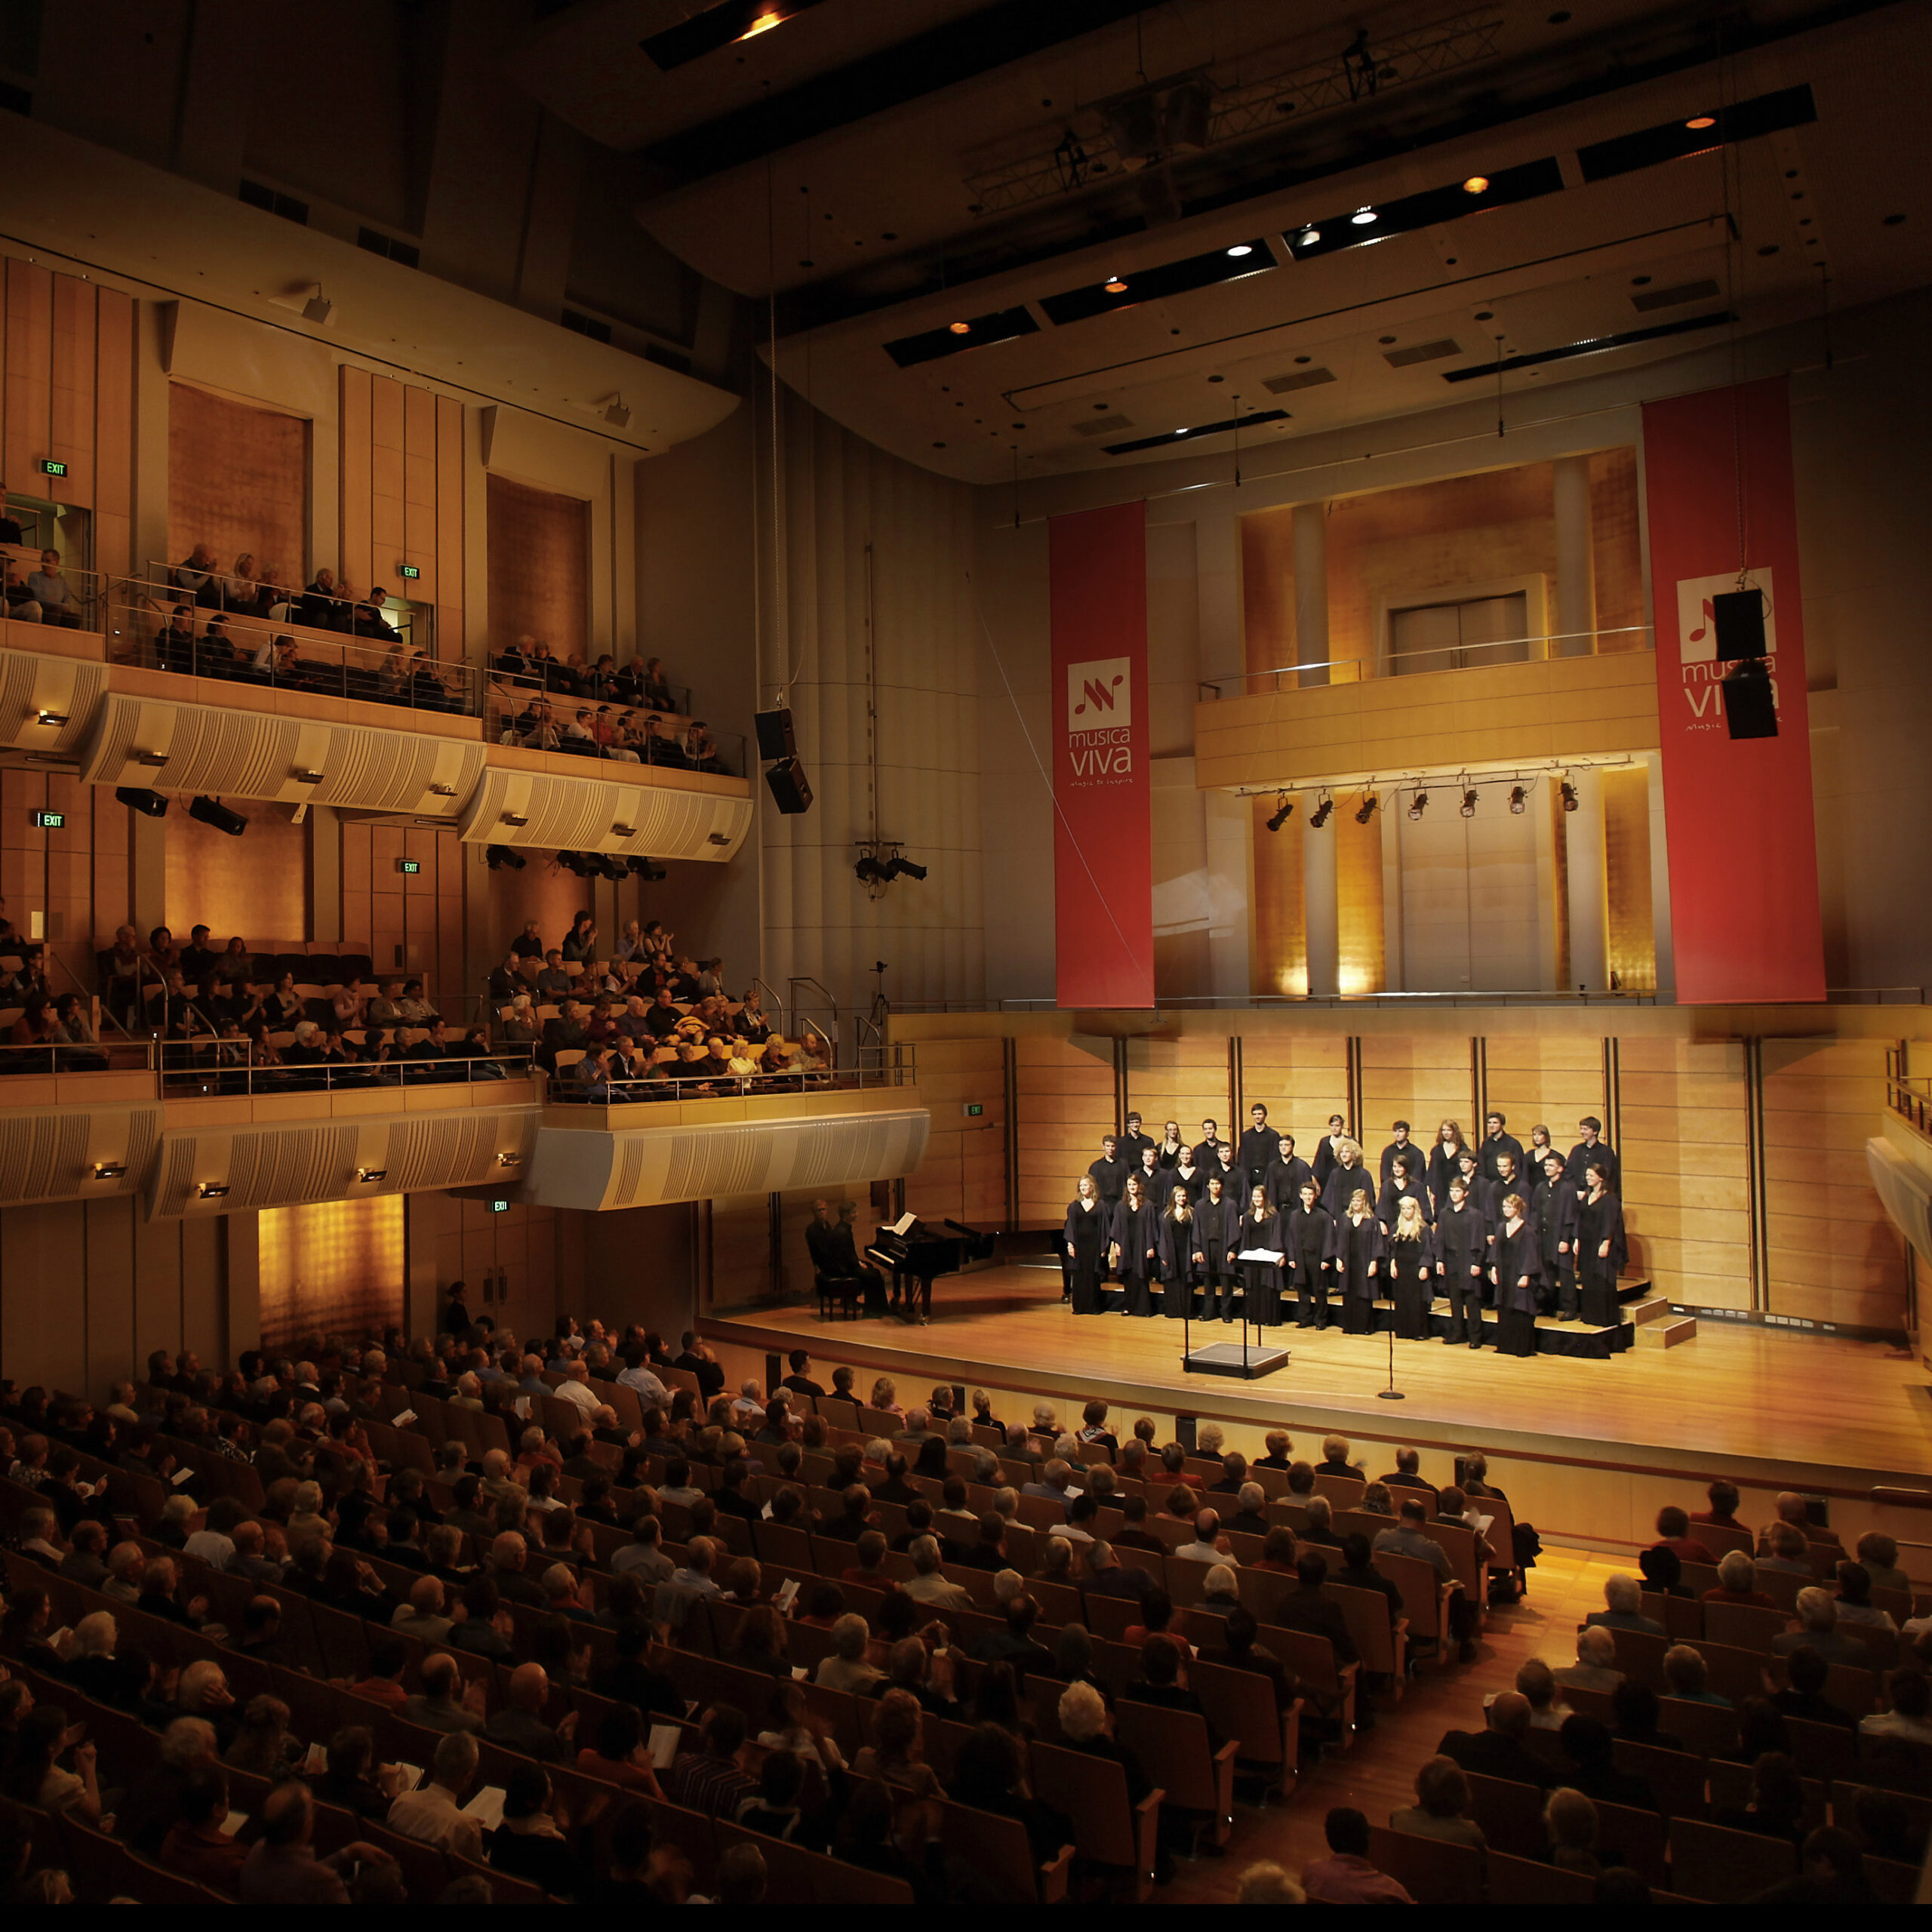 The Choir of Trinity College Cambridge in concert on tour in Australia